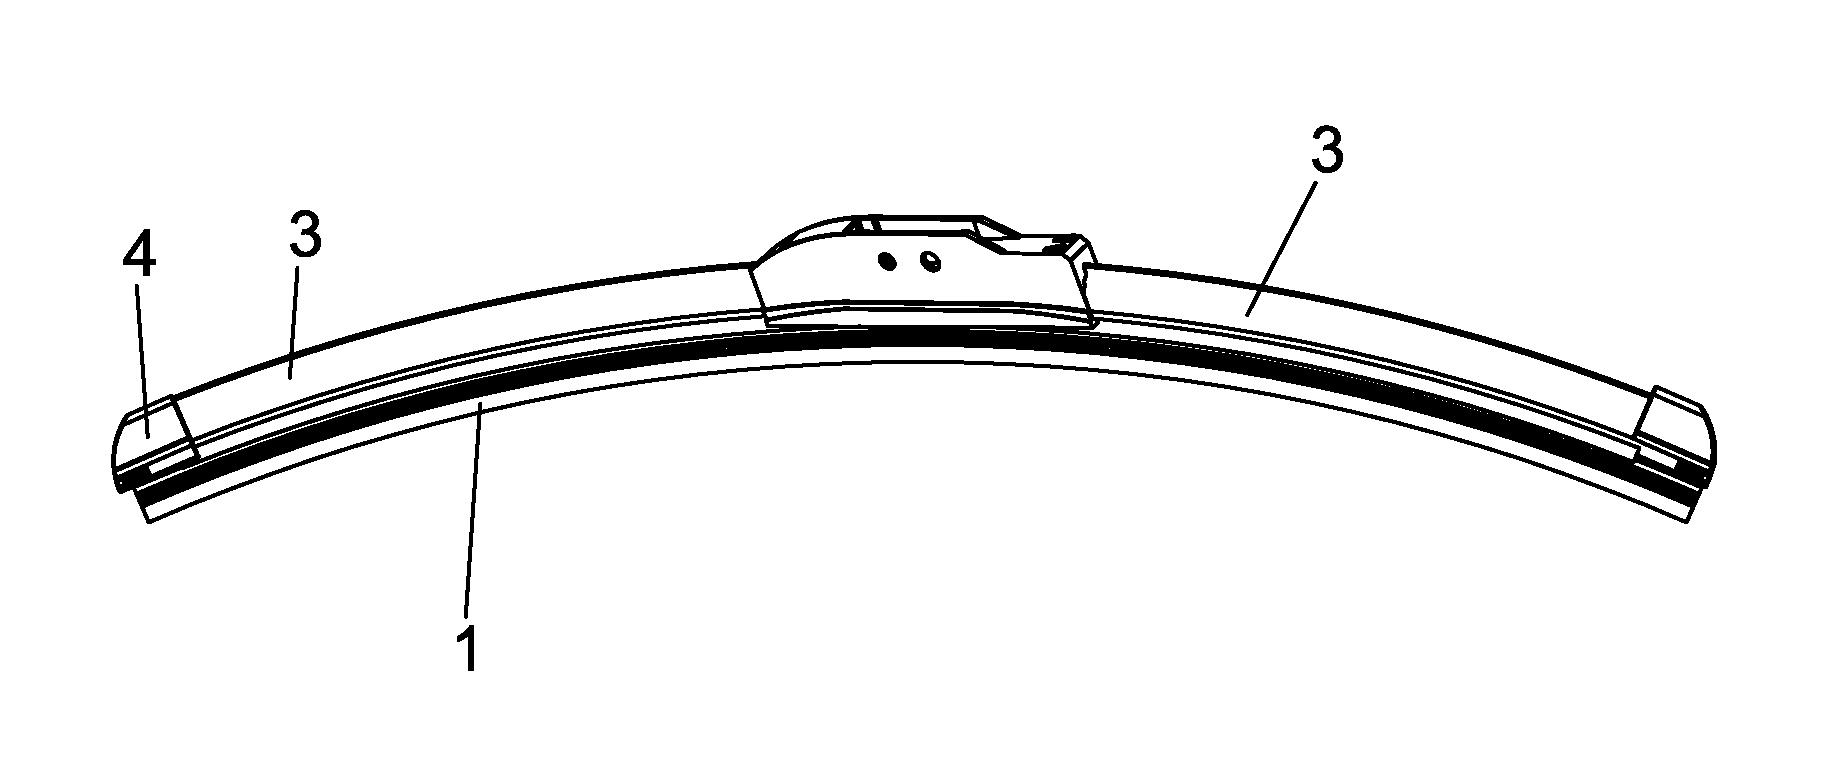 Connecting structure of a resilient support member and a strip of wiper rubber of a windshield wiper